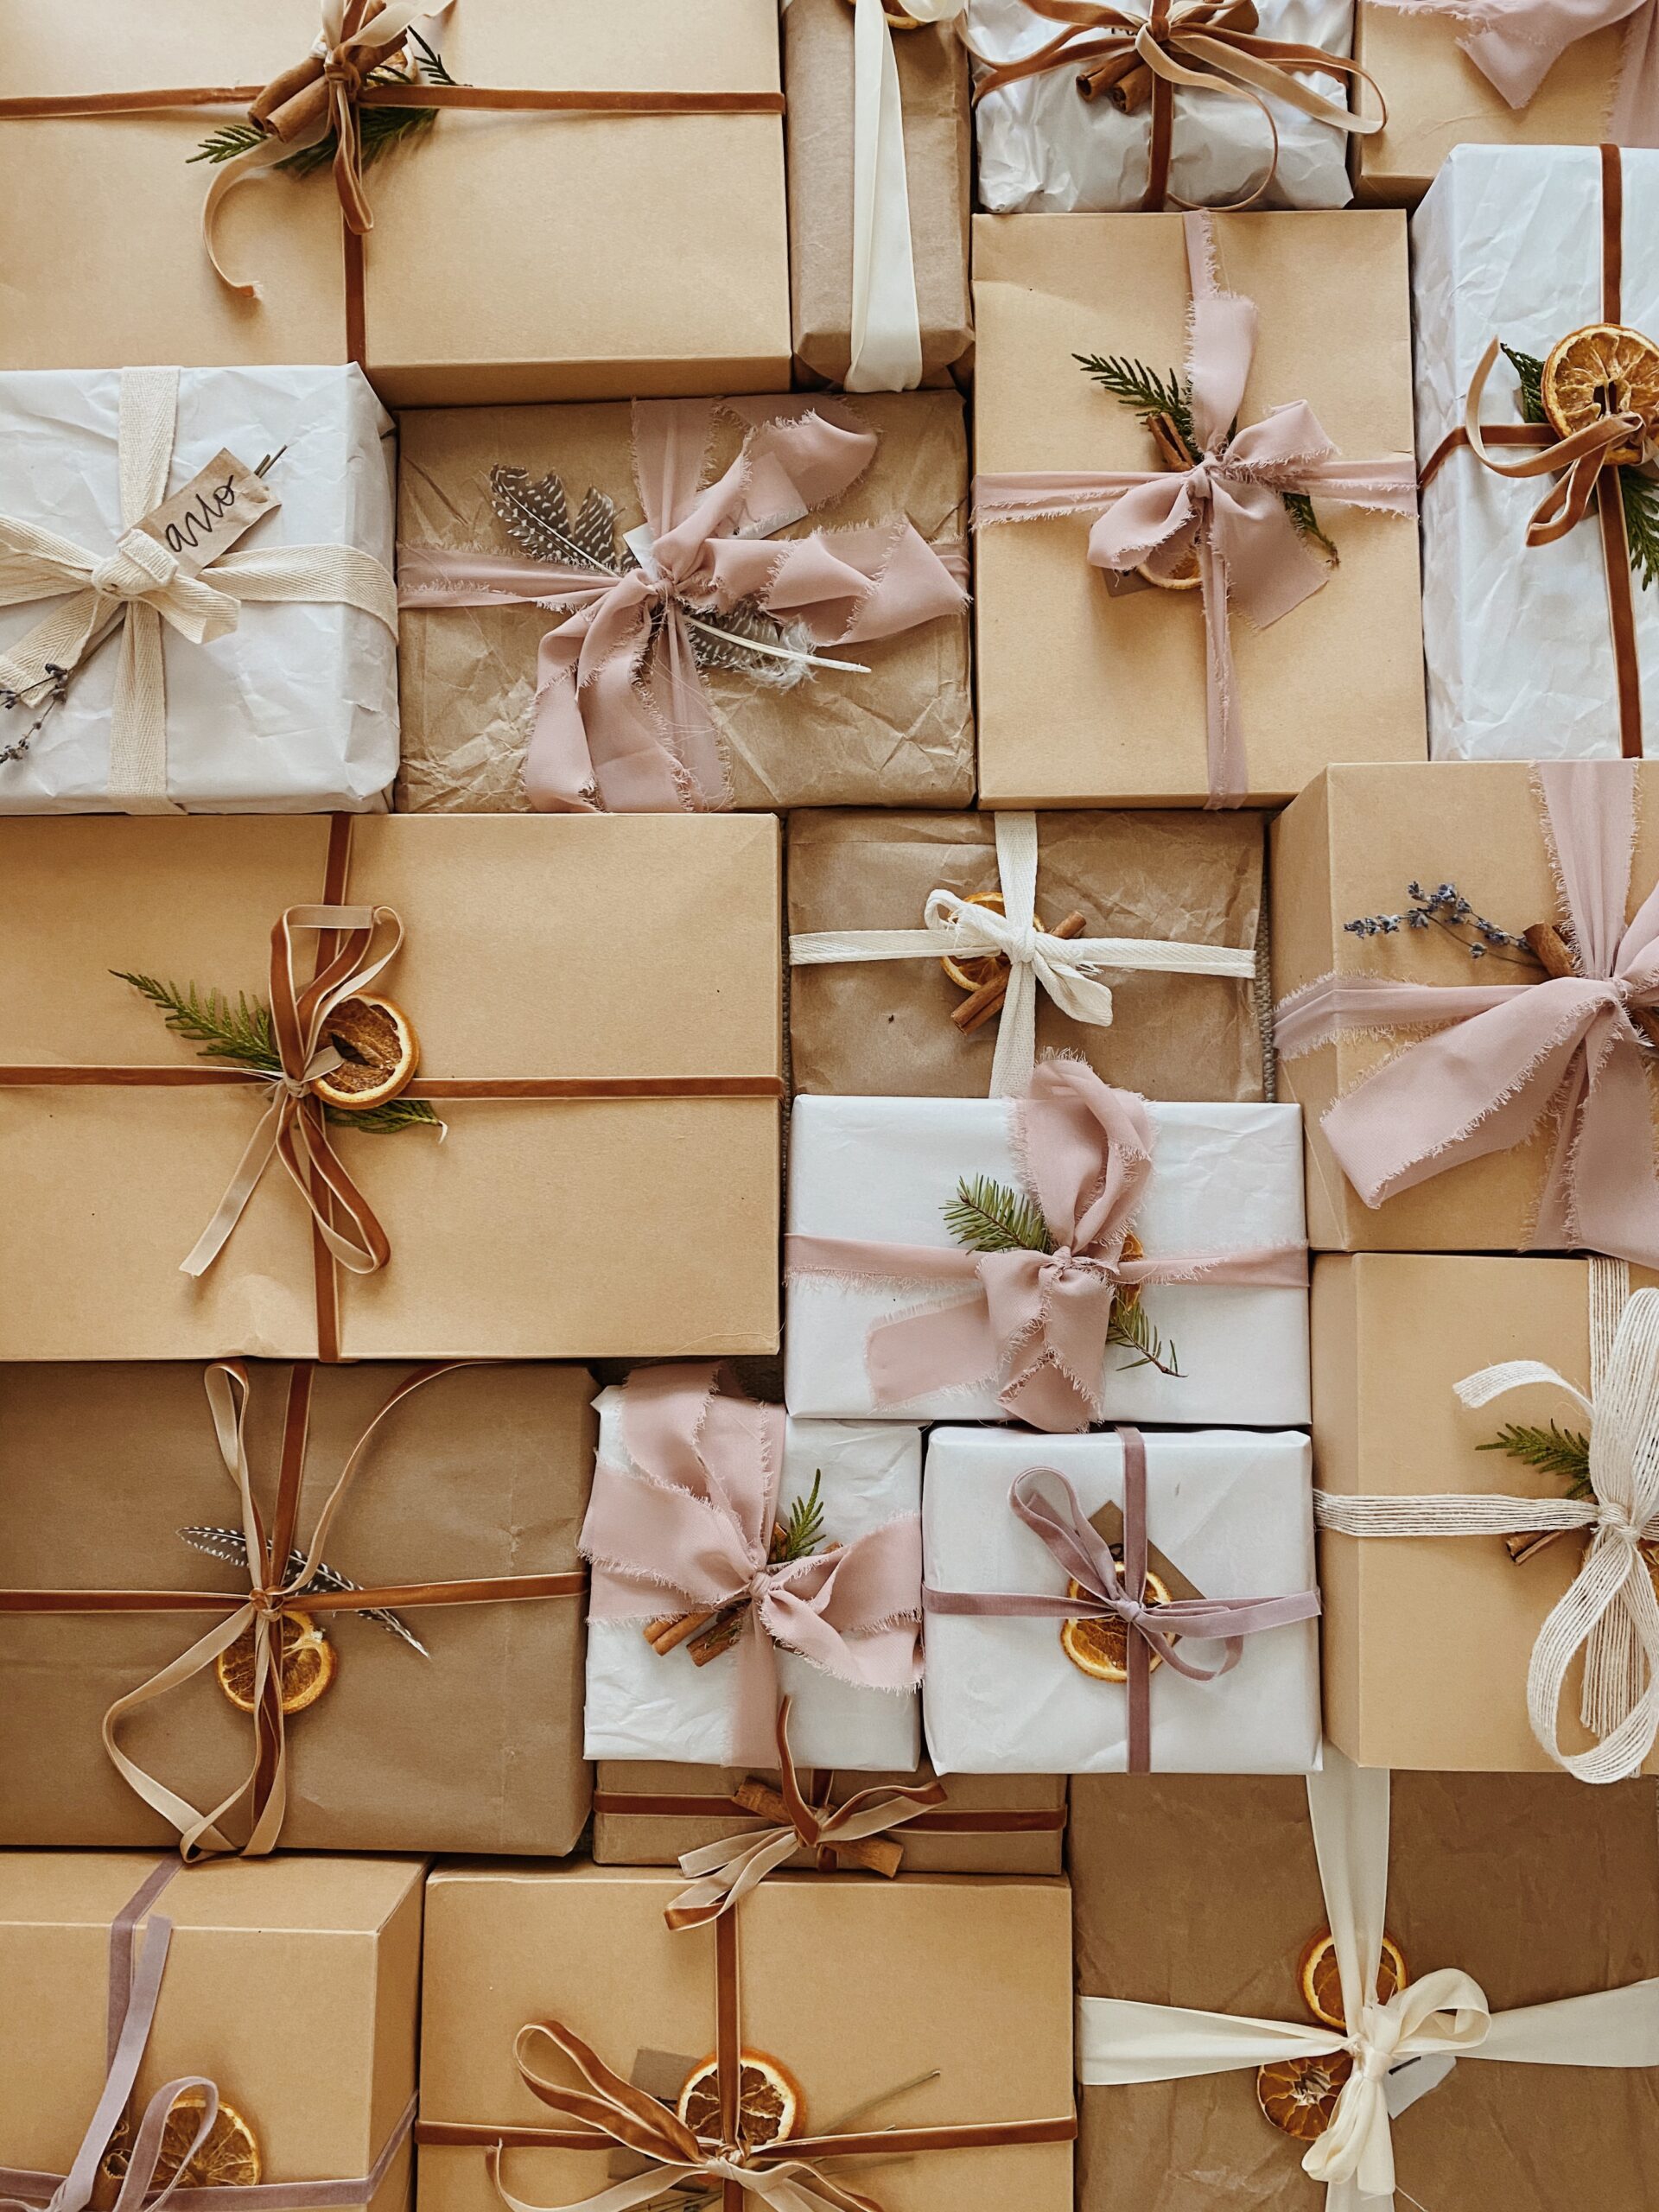 Tips and ideas on wrapping presents creatively | ifolor